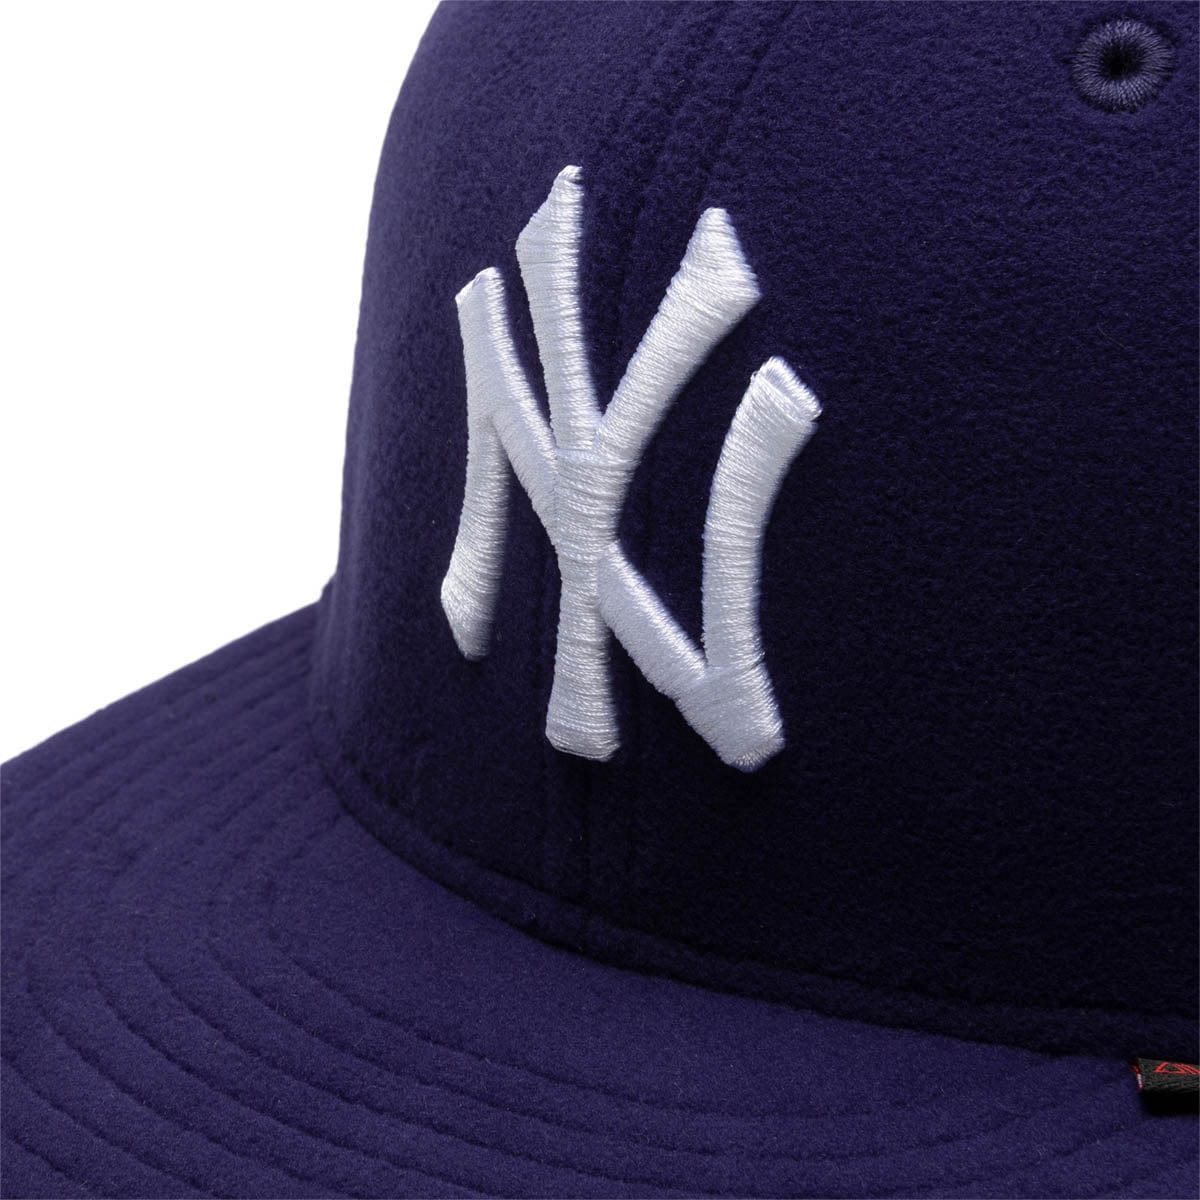 Polartec x MLB 59Fifty Fitted Hat Collection by Polartec x MLB x